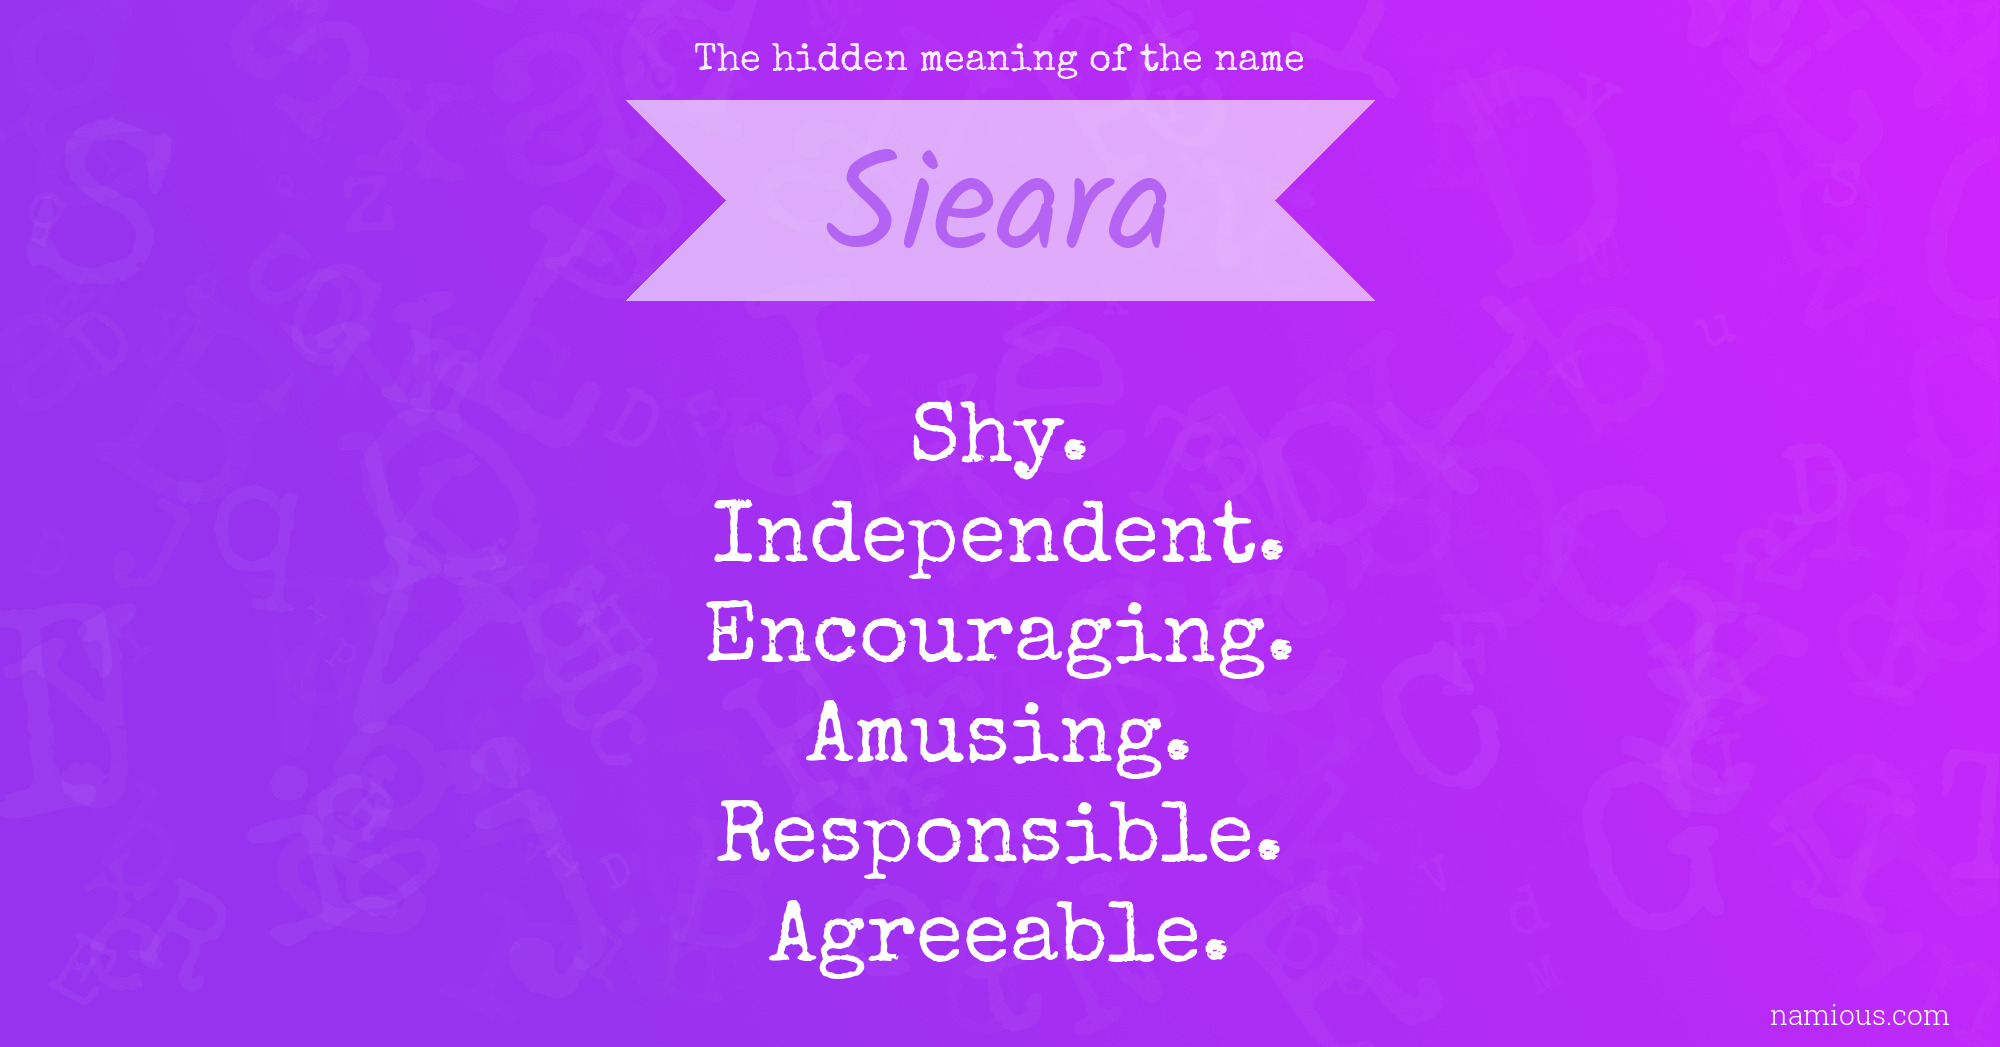 The hidden meaning of the name Sieara